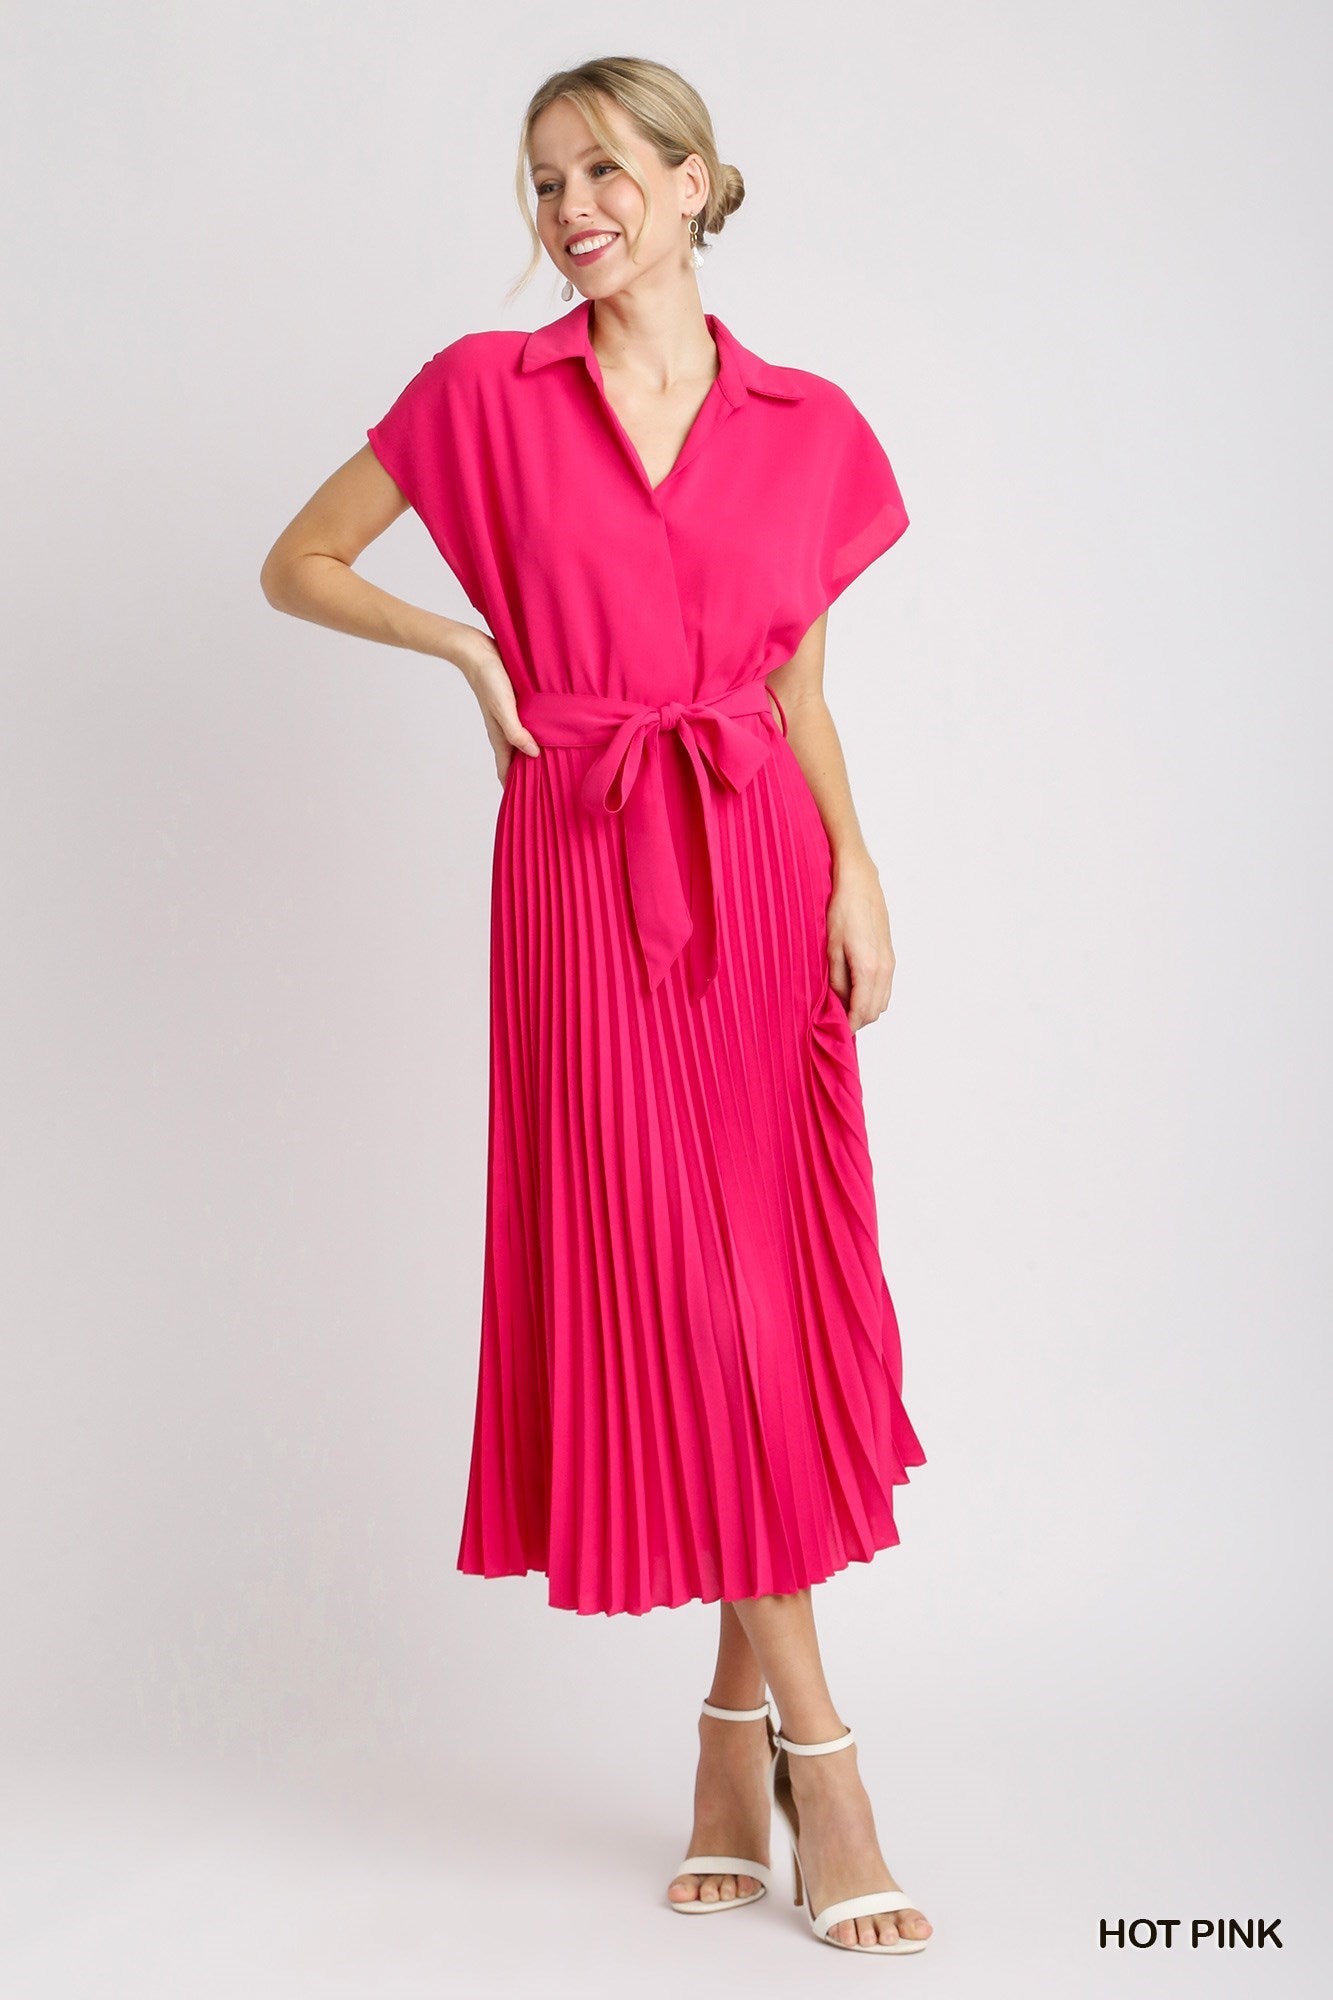 COLLARED V-NECK PLEATED DRESS WITH BELT - HOT PINK